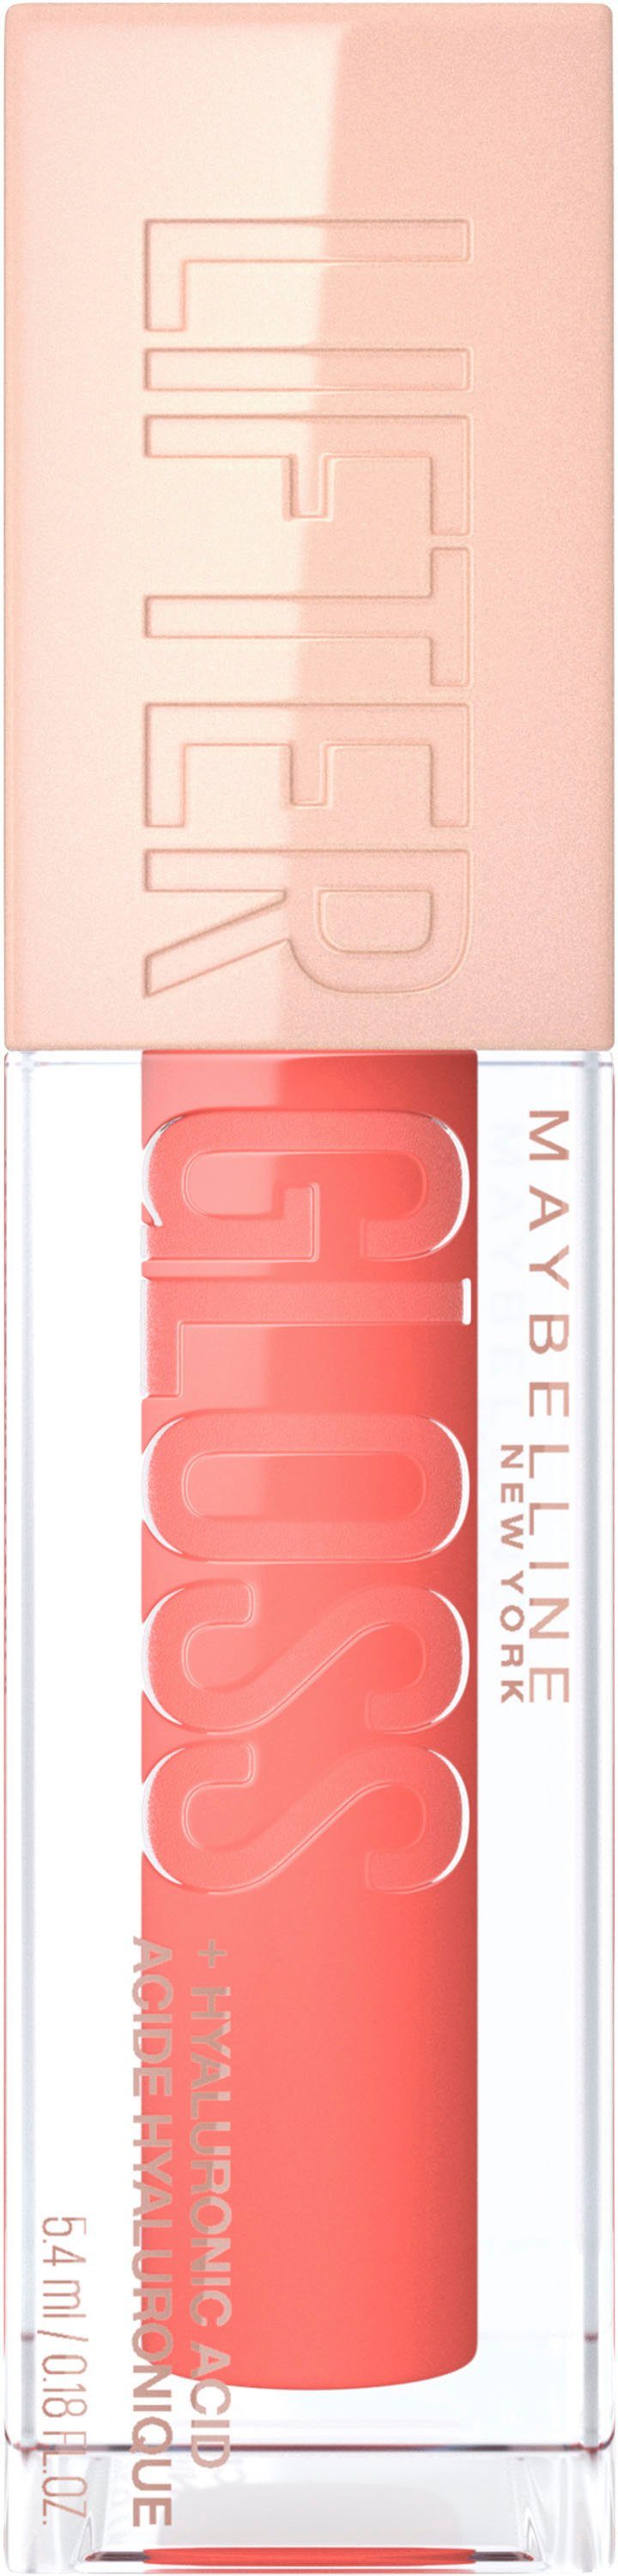 Lifter Maybelline NEW MAYBELLINE YORK Lipgloss York New Gloss